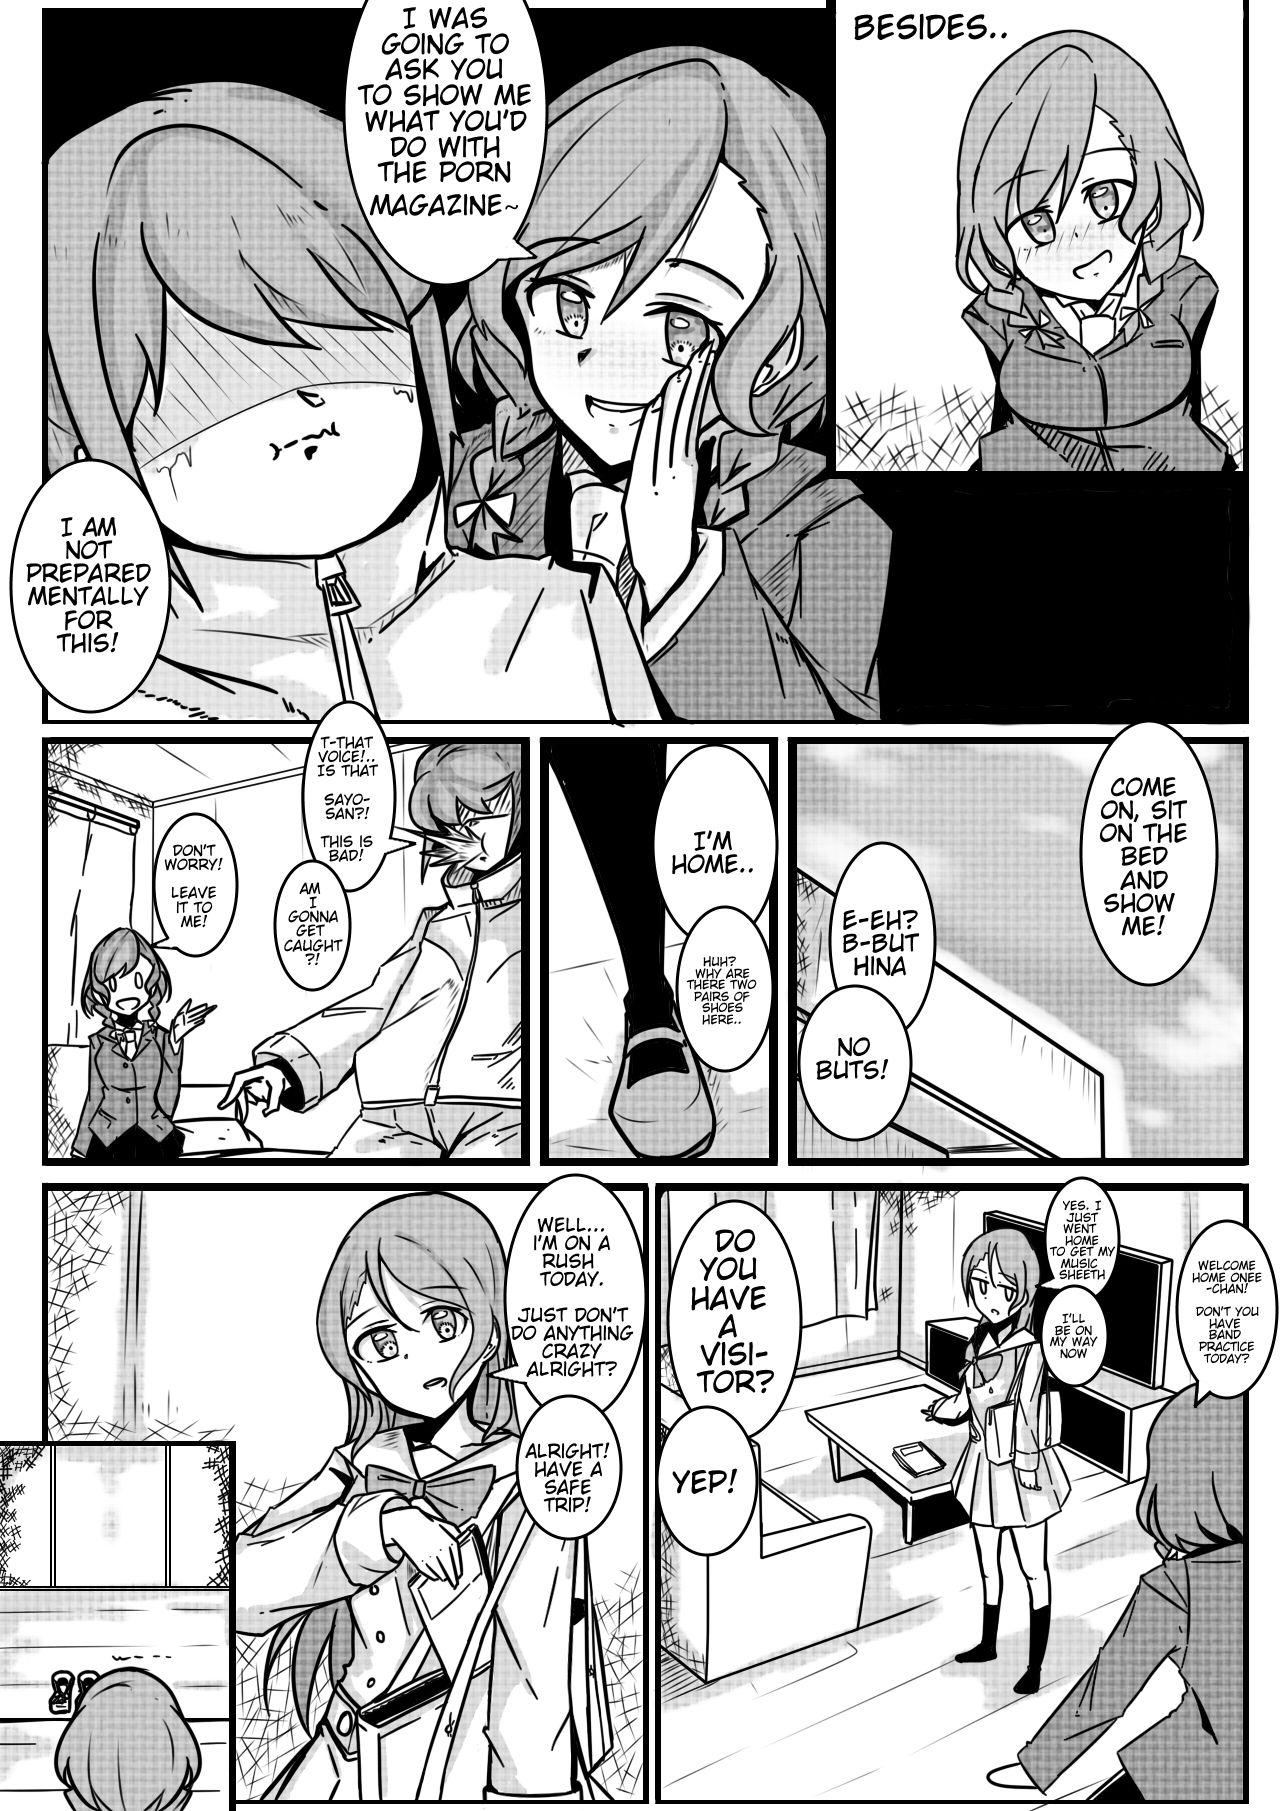 Huge Tits Minty Surprise - Bang dream Slapping - Page 8